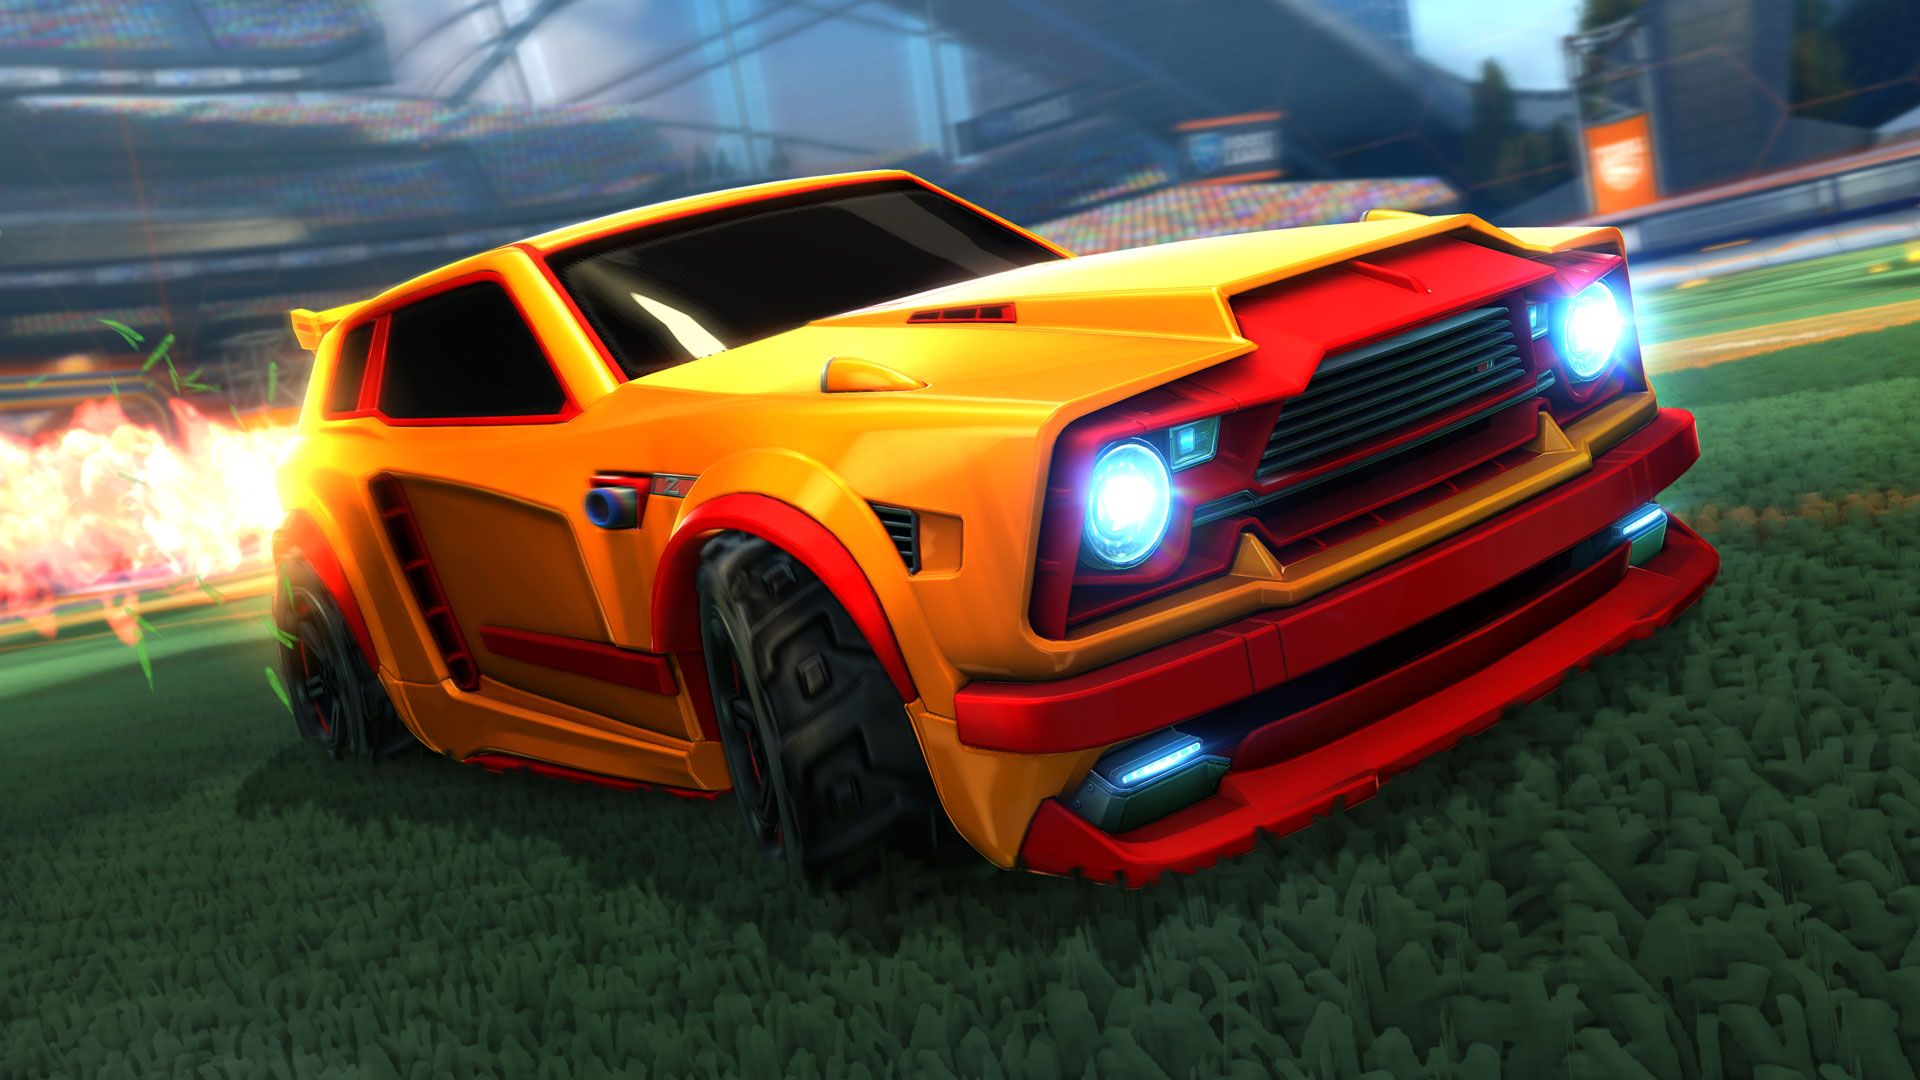 pictures of rocket league cars